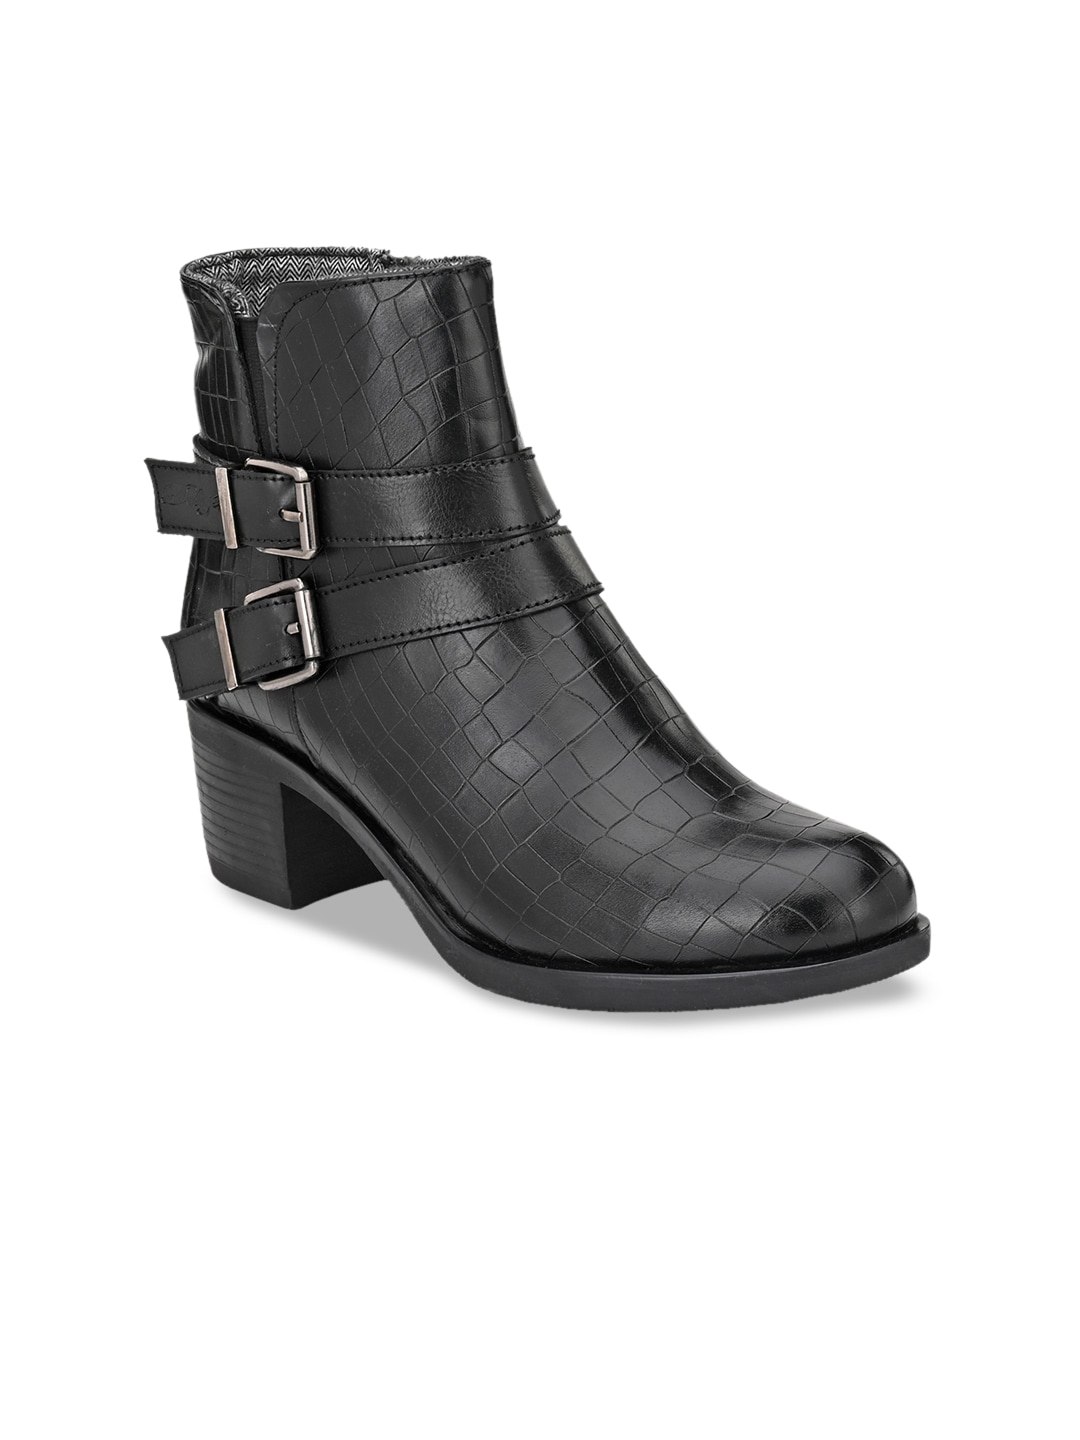 Delize Women Black Textured High-Top Block Heeled Boots Price in India